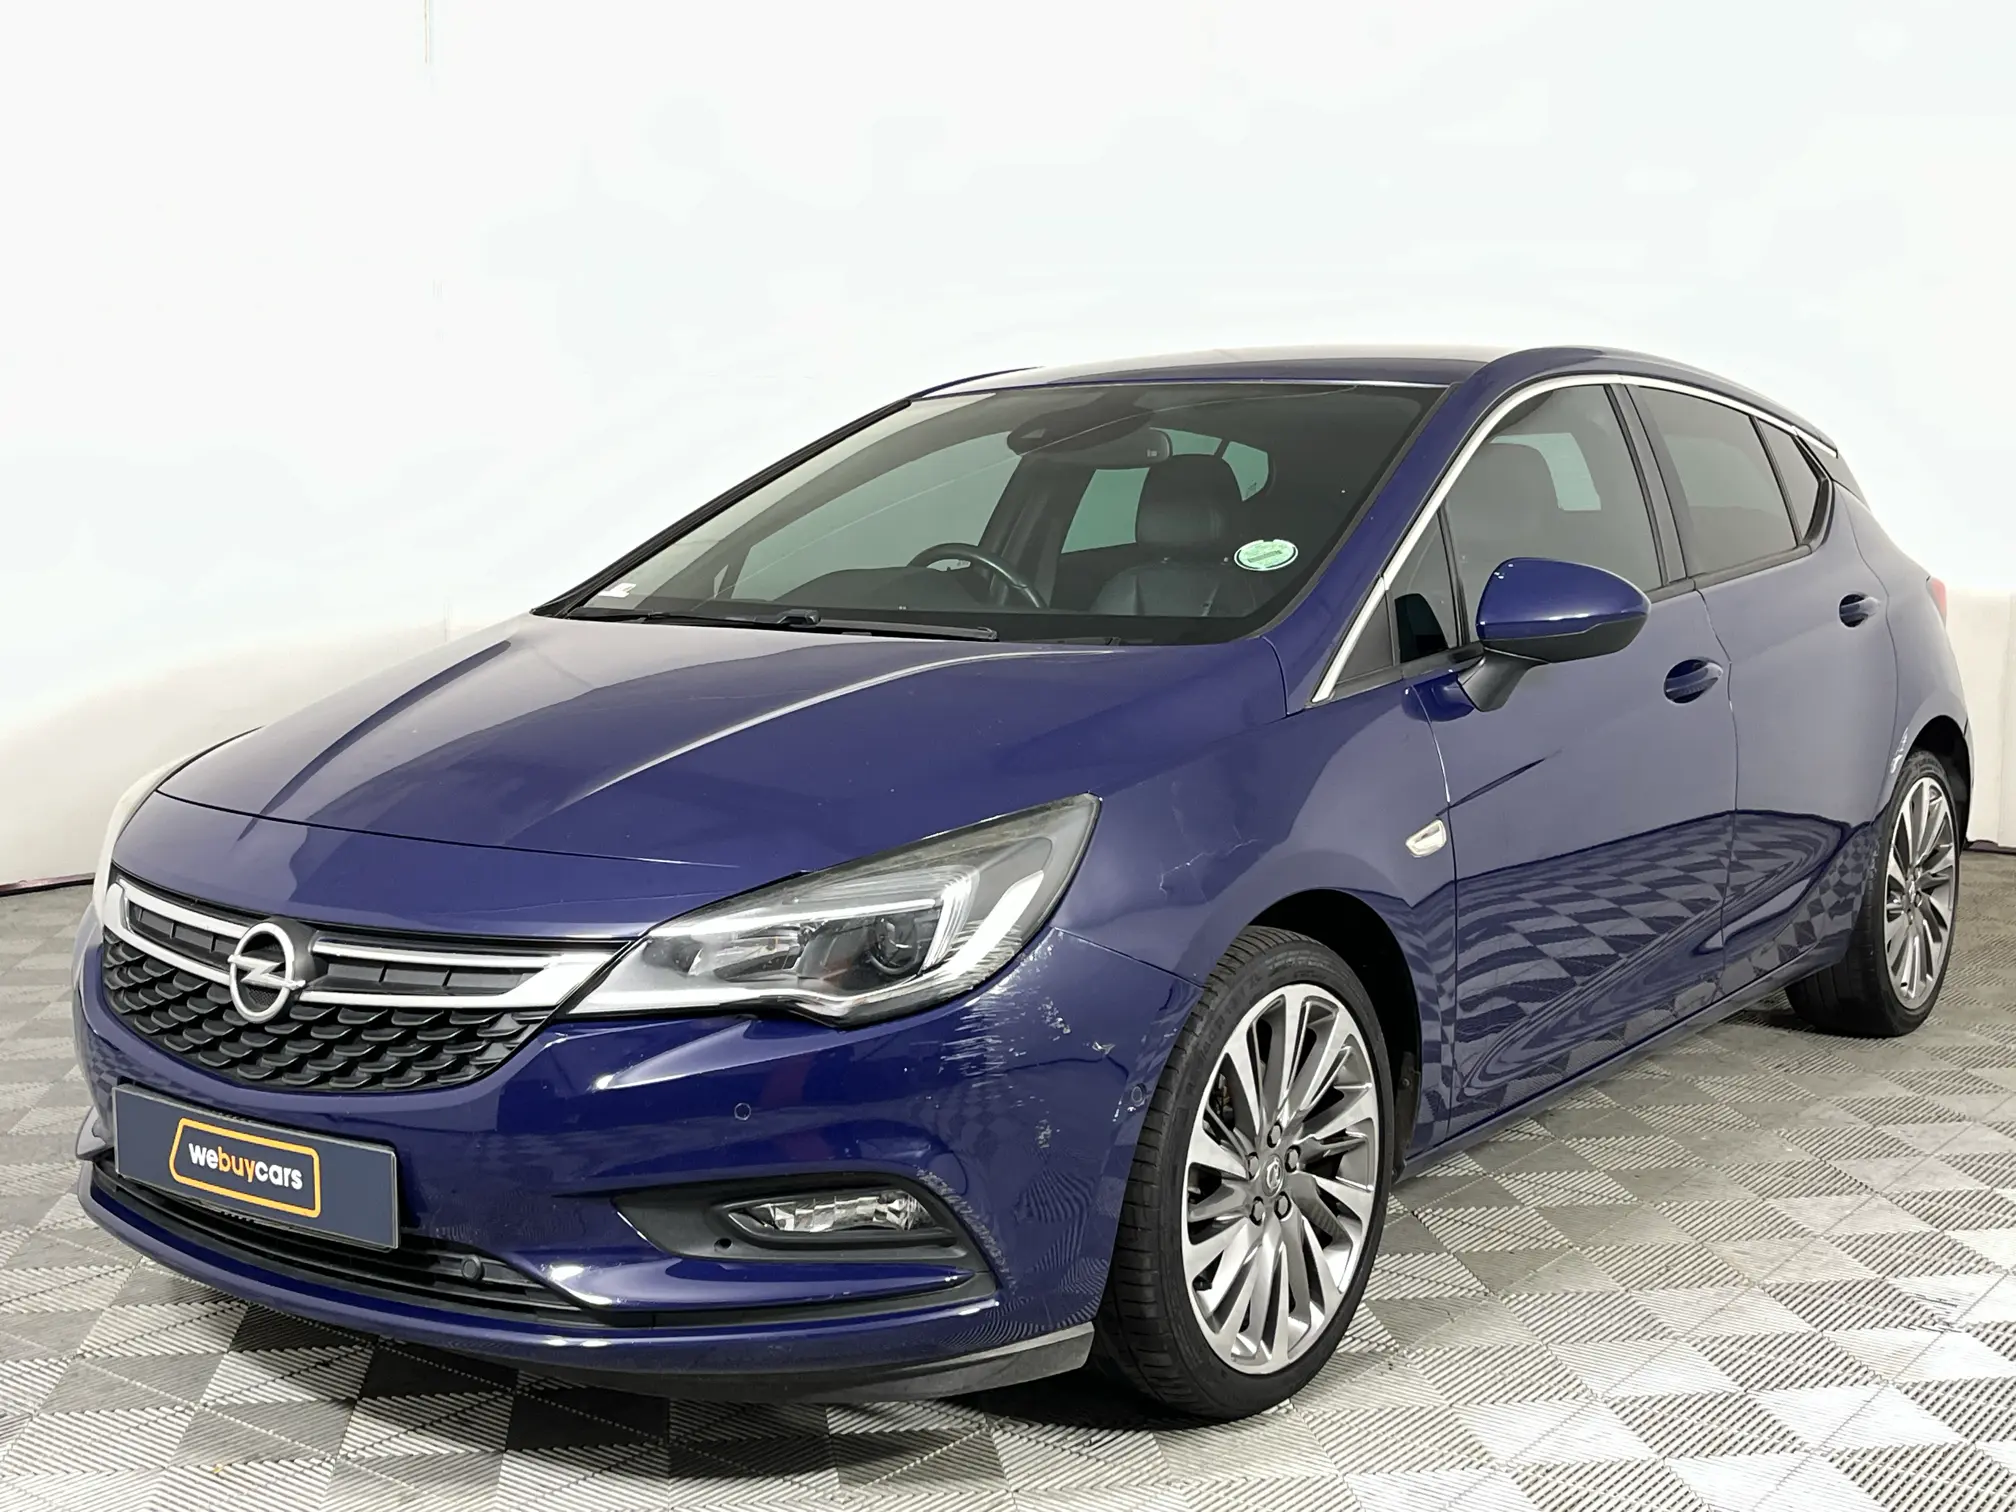 2017 Opel Astra 1.6T Sport (5dr)